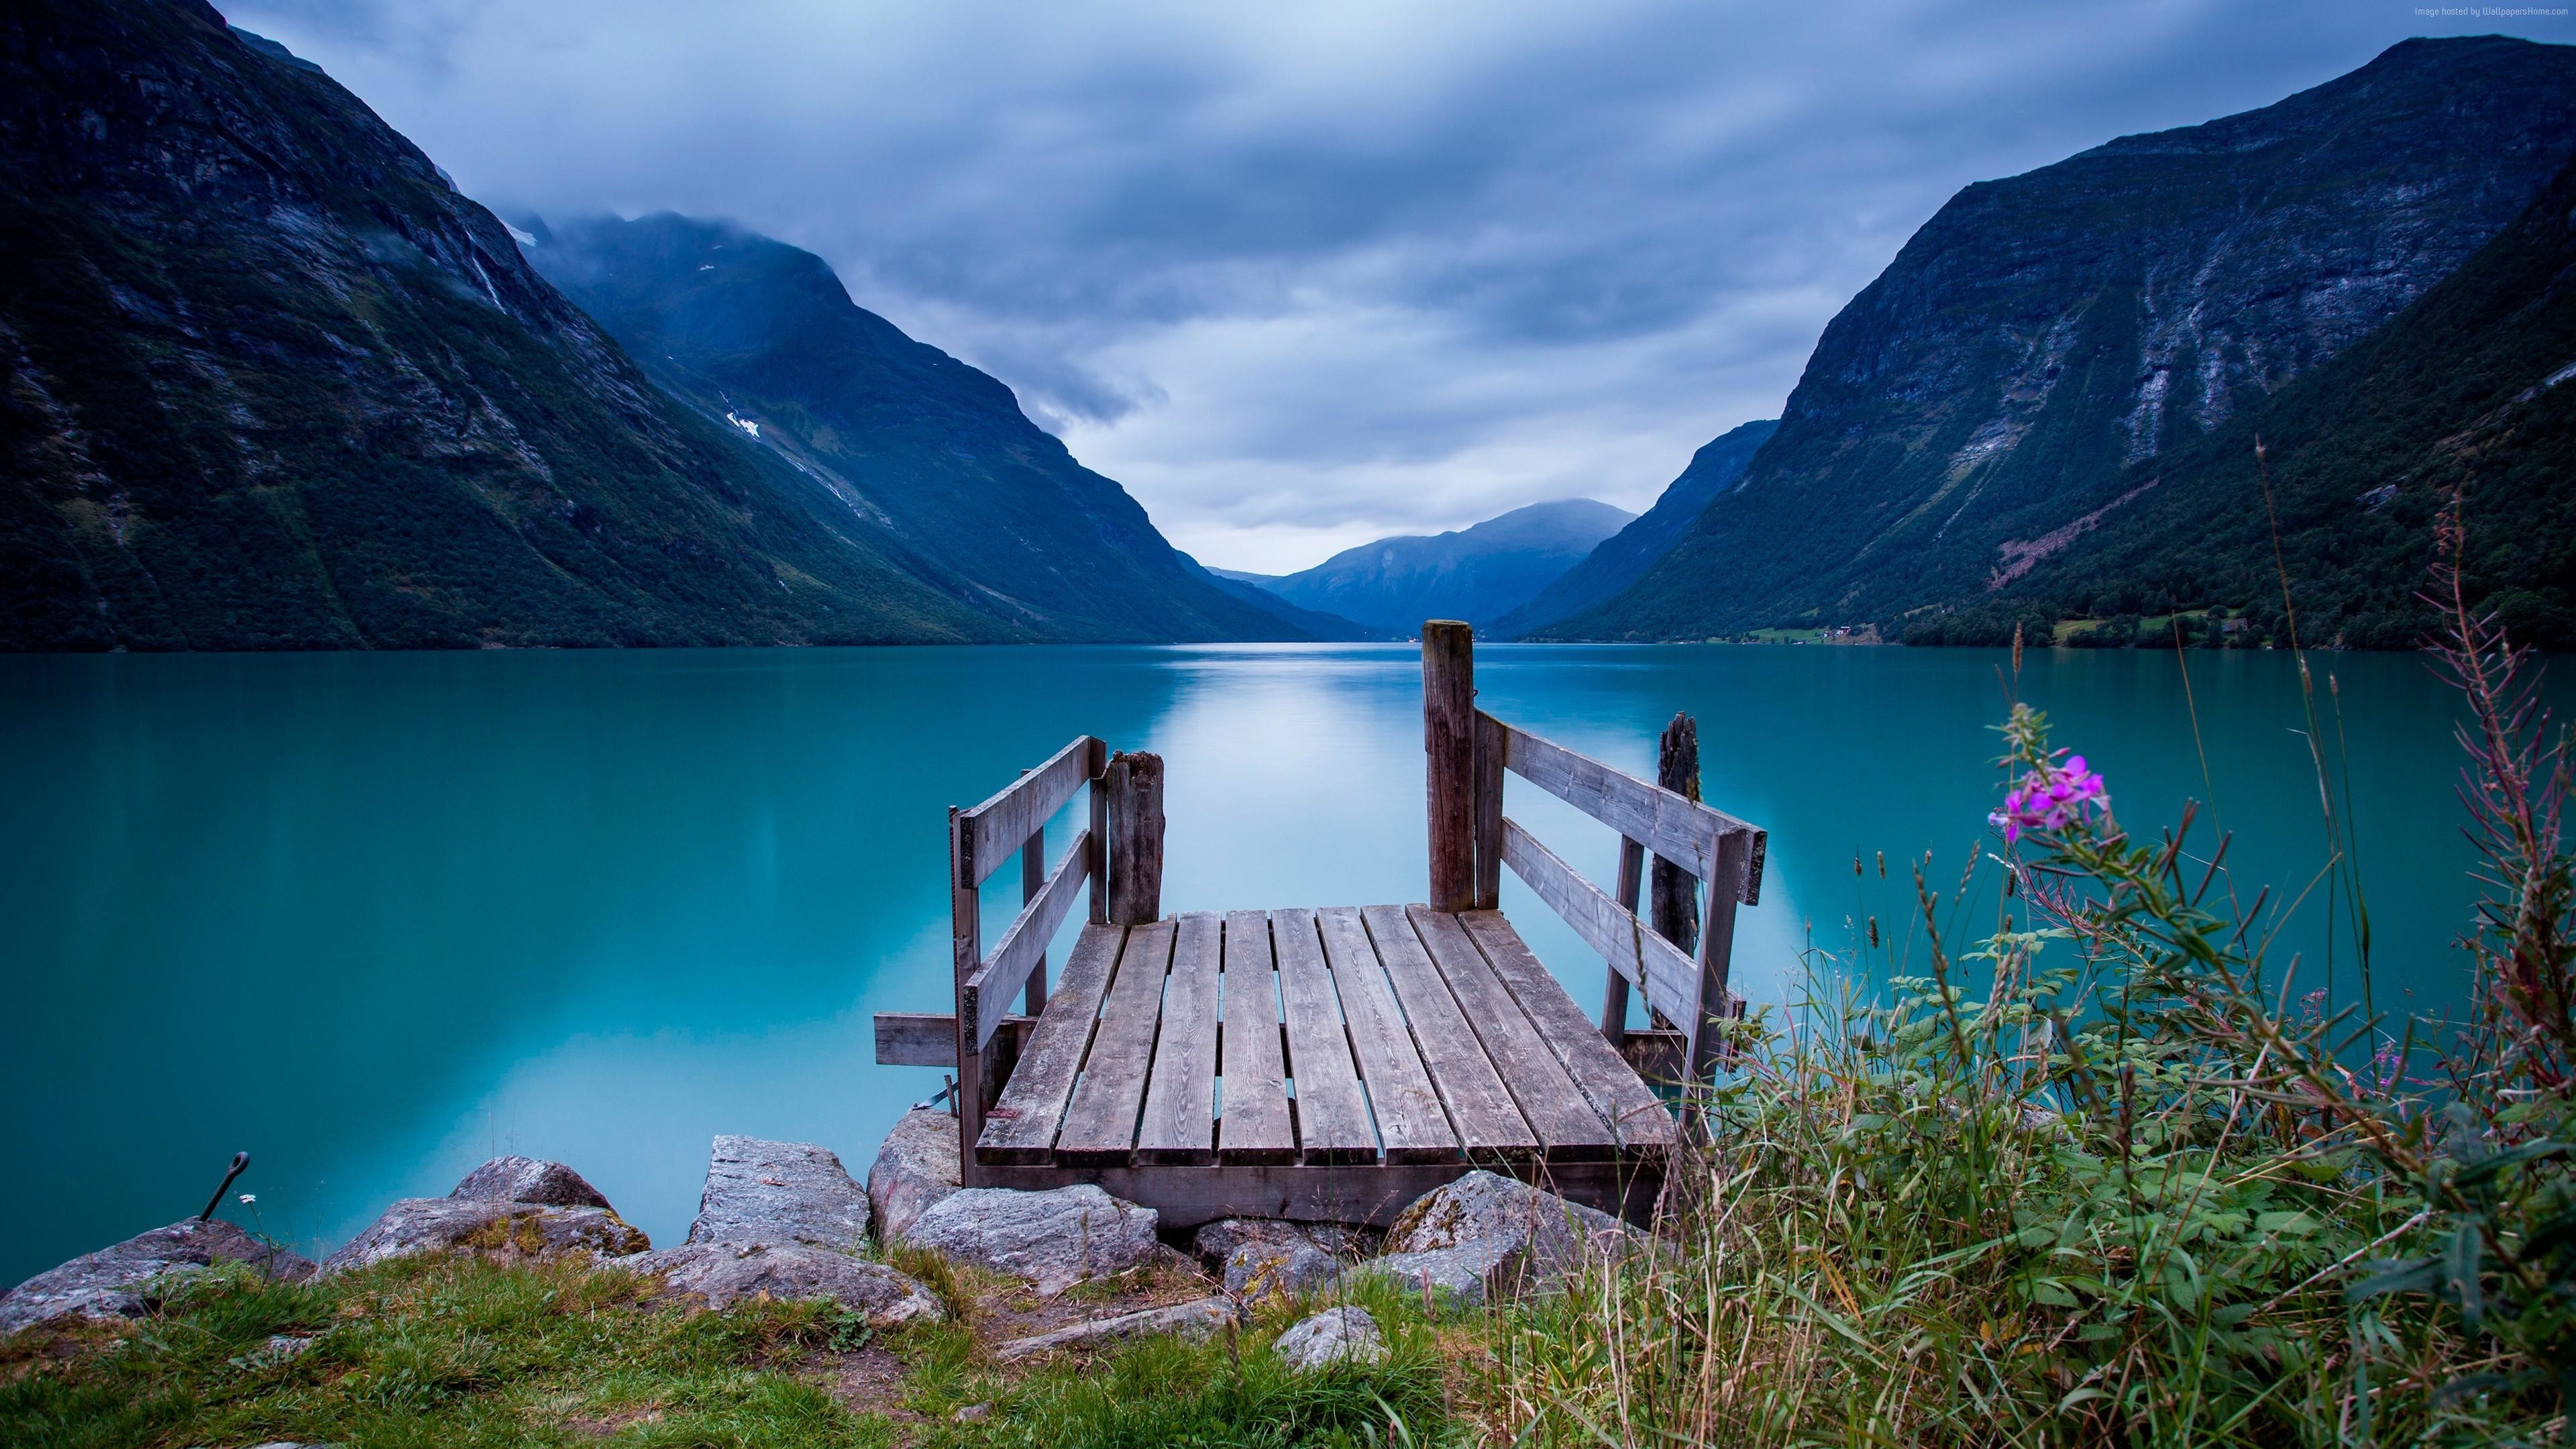 3840x2160, Most Beautiful Scenery From Norway Wallpaper - Norway Wallpaper  4k - 3840x2160 Wallpaper 